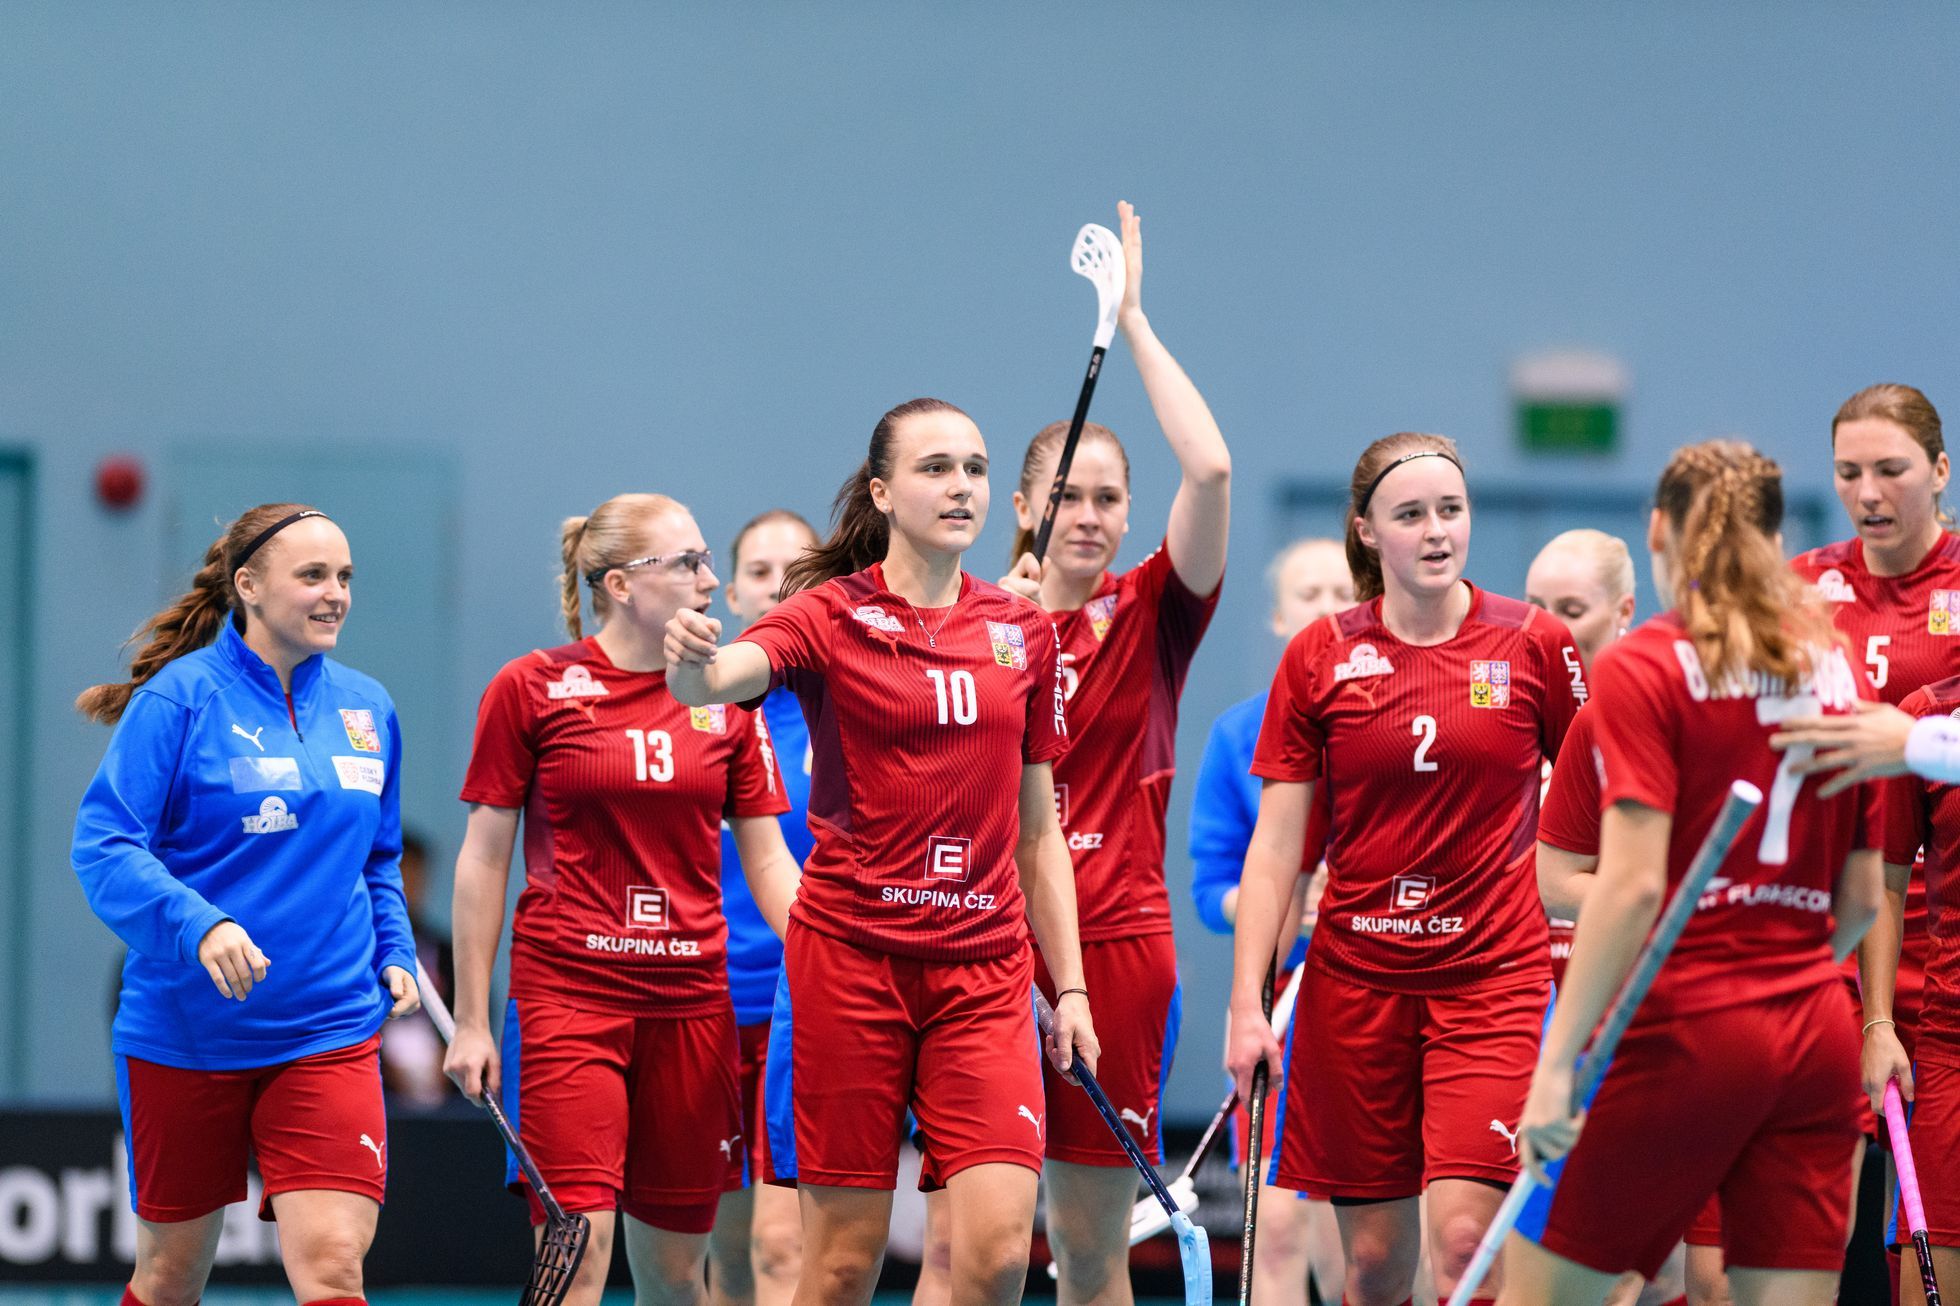 Czech floorball players entered the World Championship in Singapore with a 9:3 victory over Poland